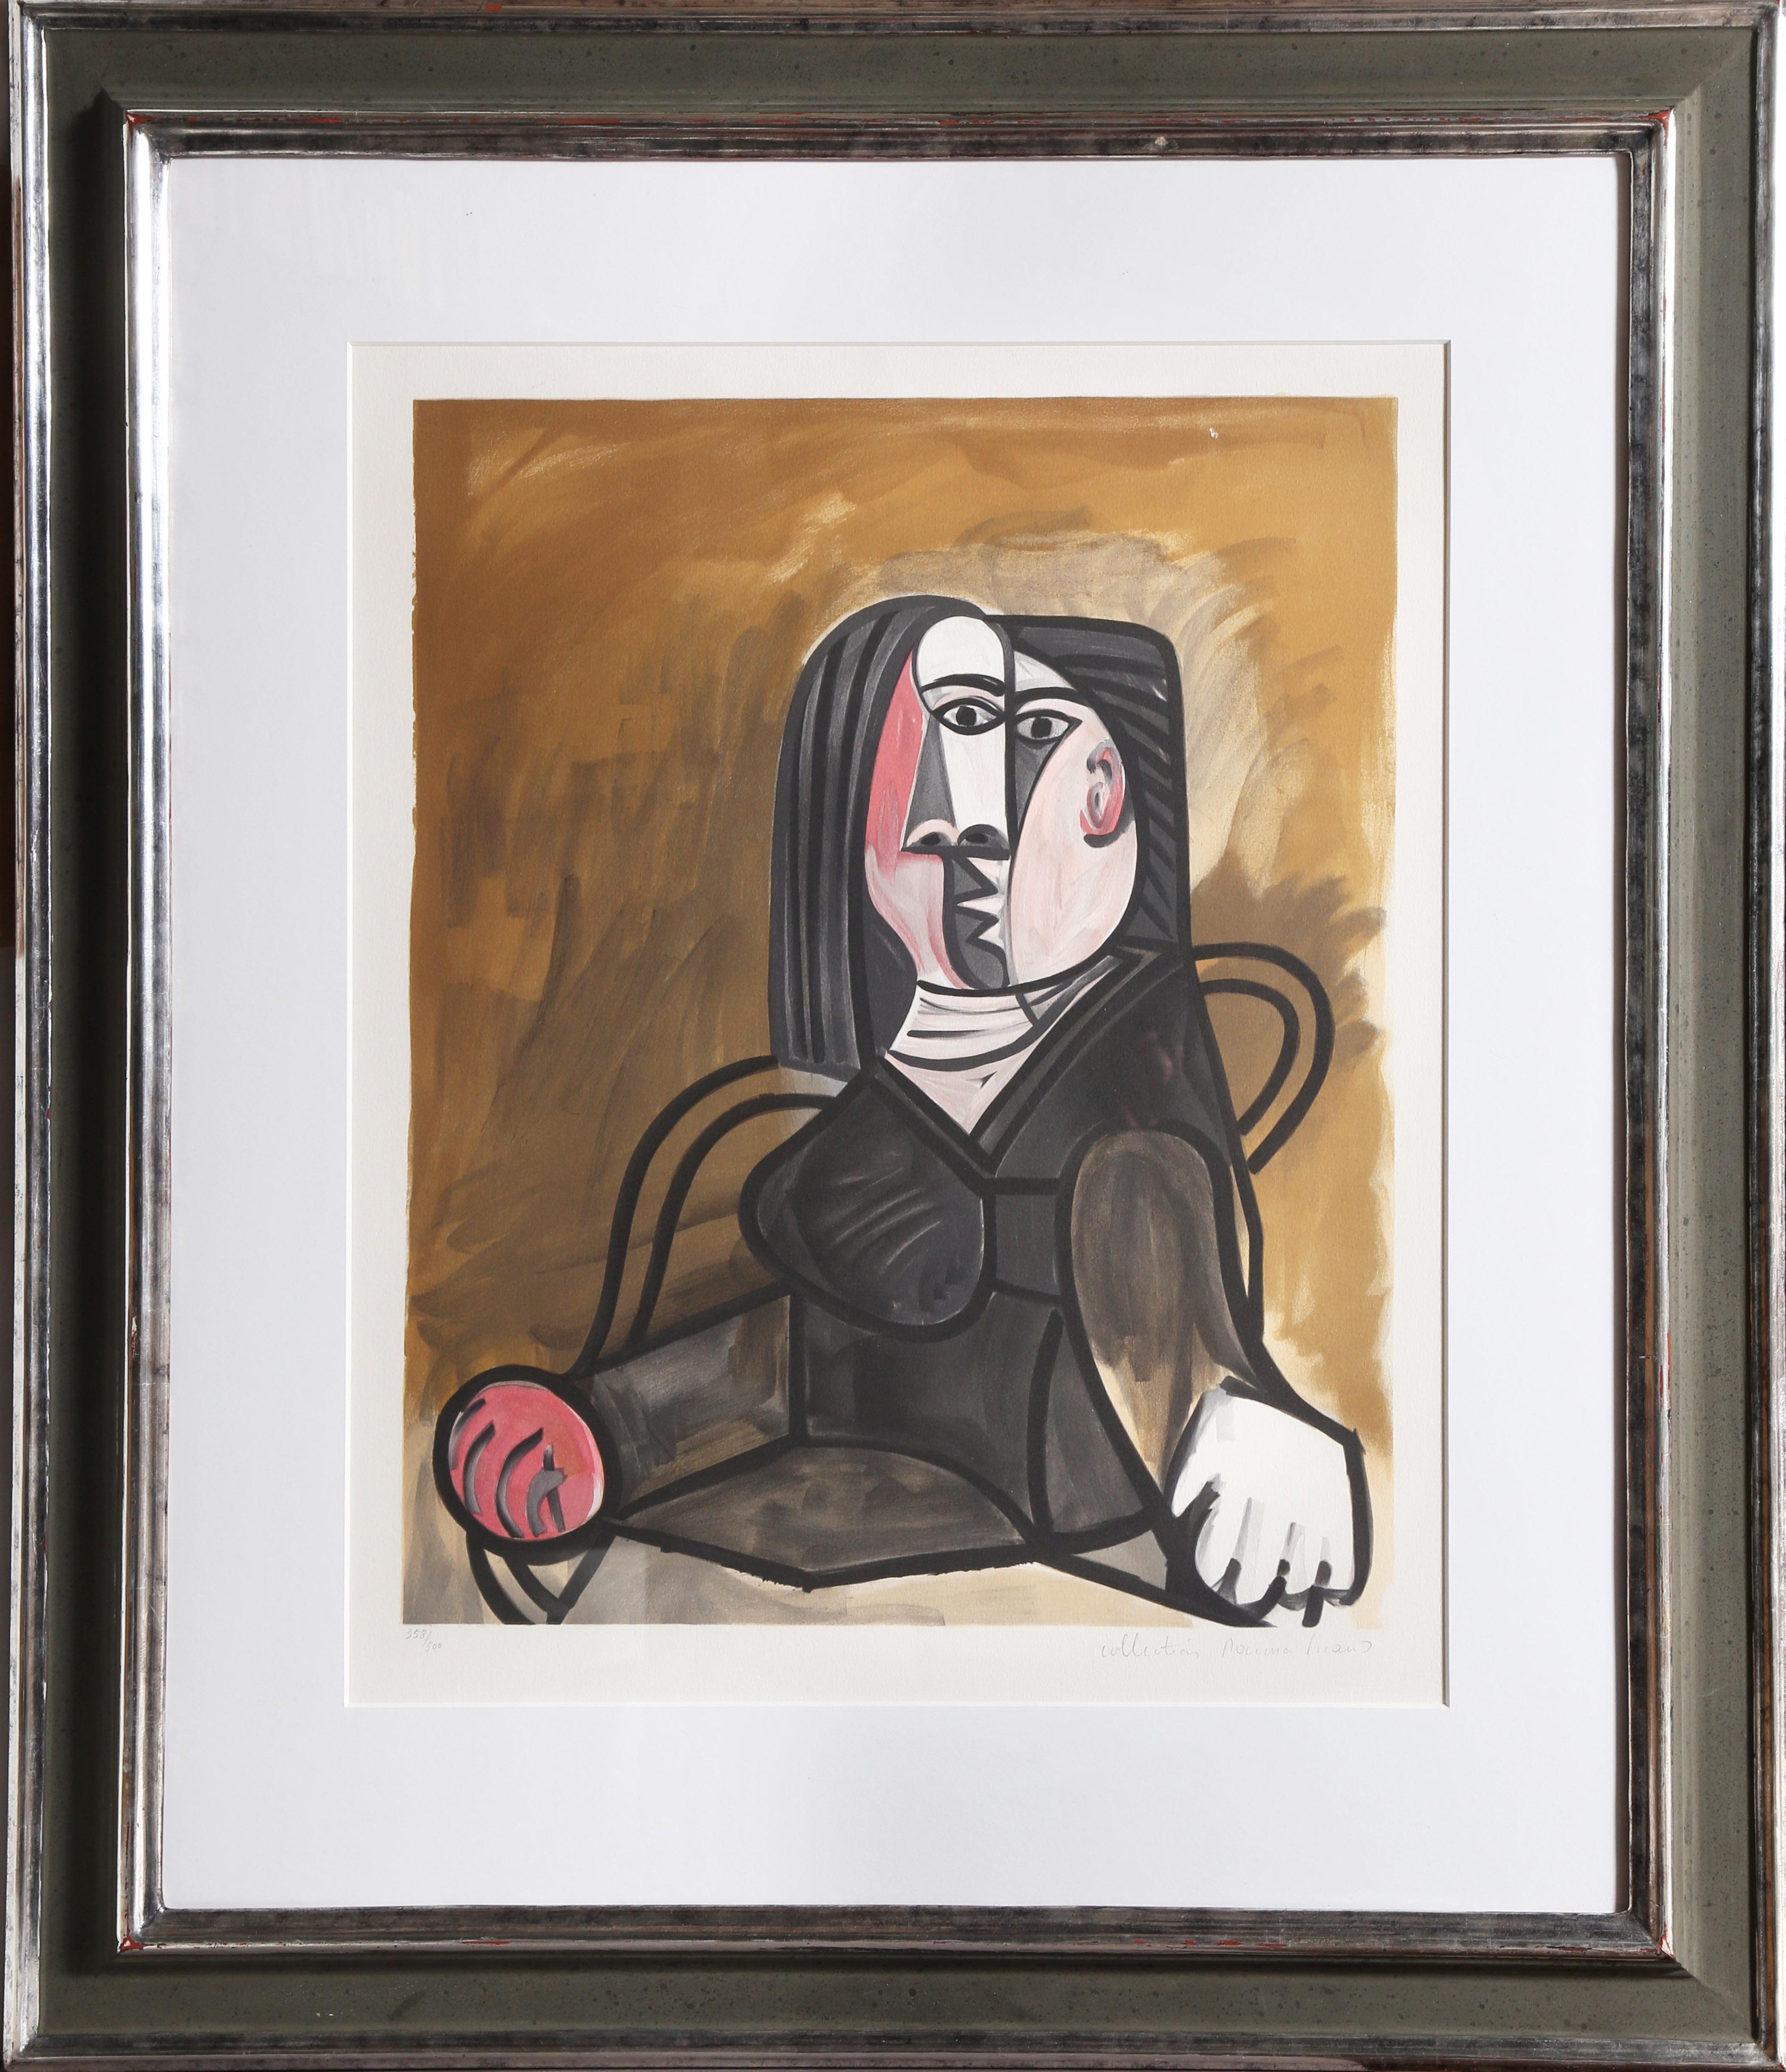 Seated in an armchair, the woman in this Pablo Picasso print appears fragmented and disjointed due to the artist’s integration of multiple perspectives. A lithograph from the Marina Picasso Estate Collection after the Pablo Picasso artwork "Femme